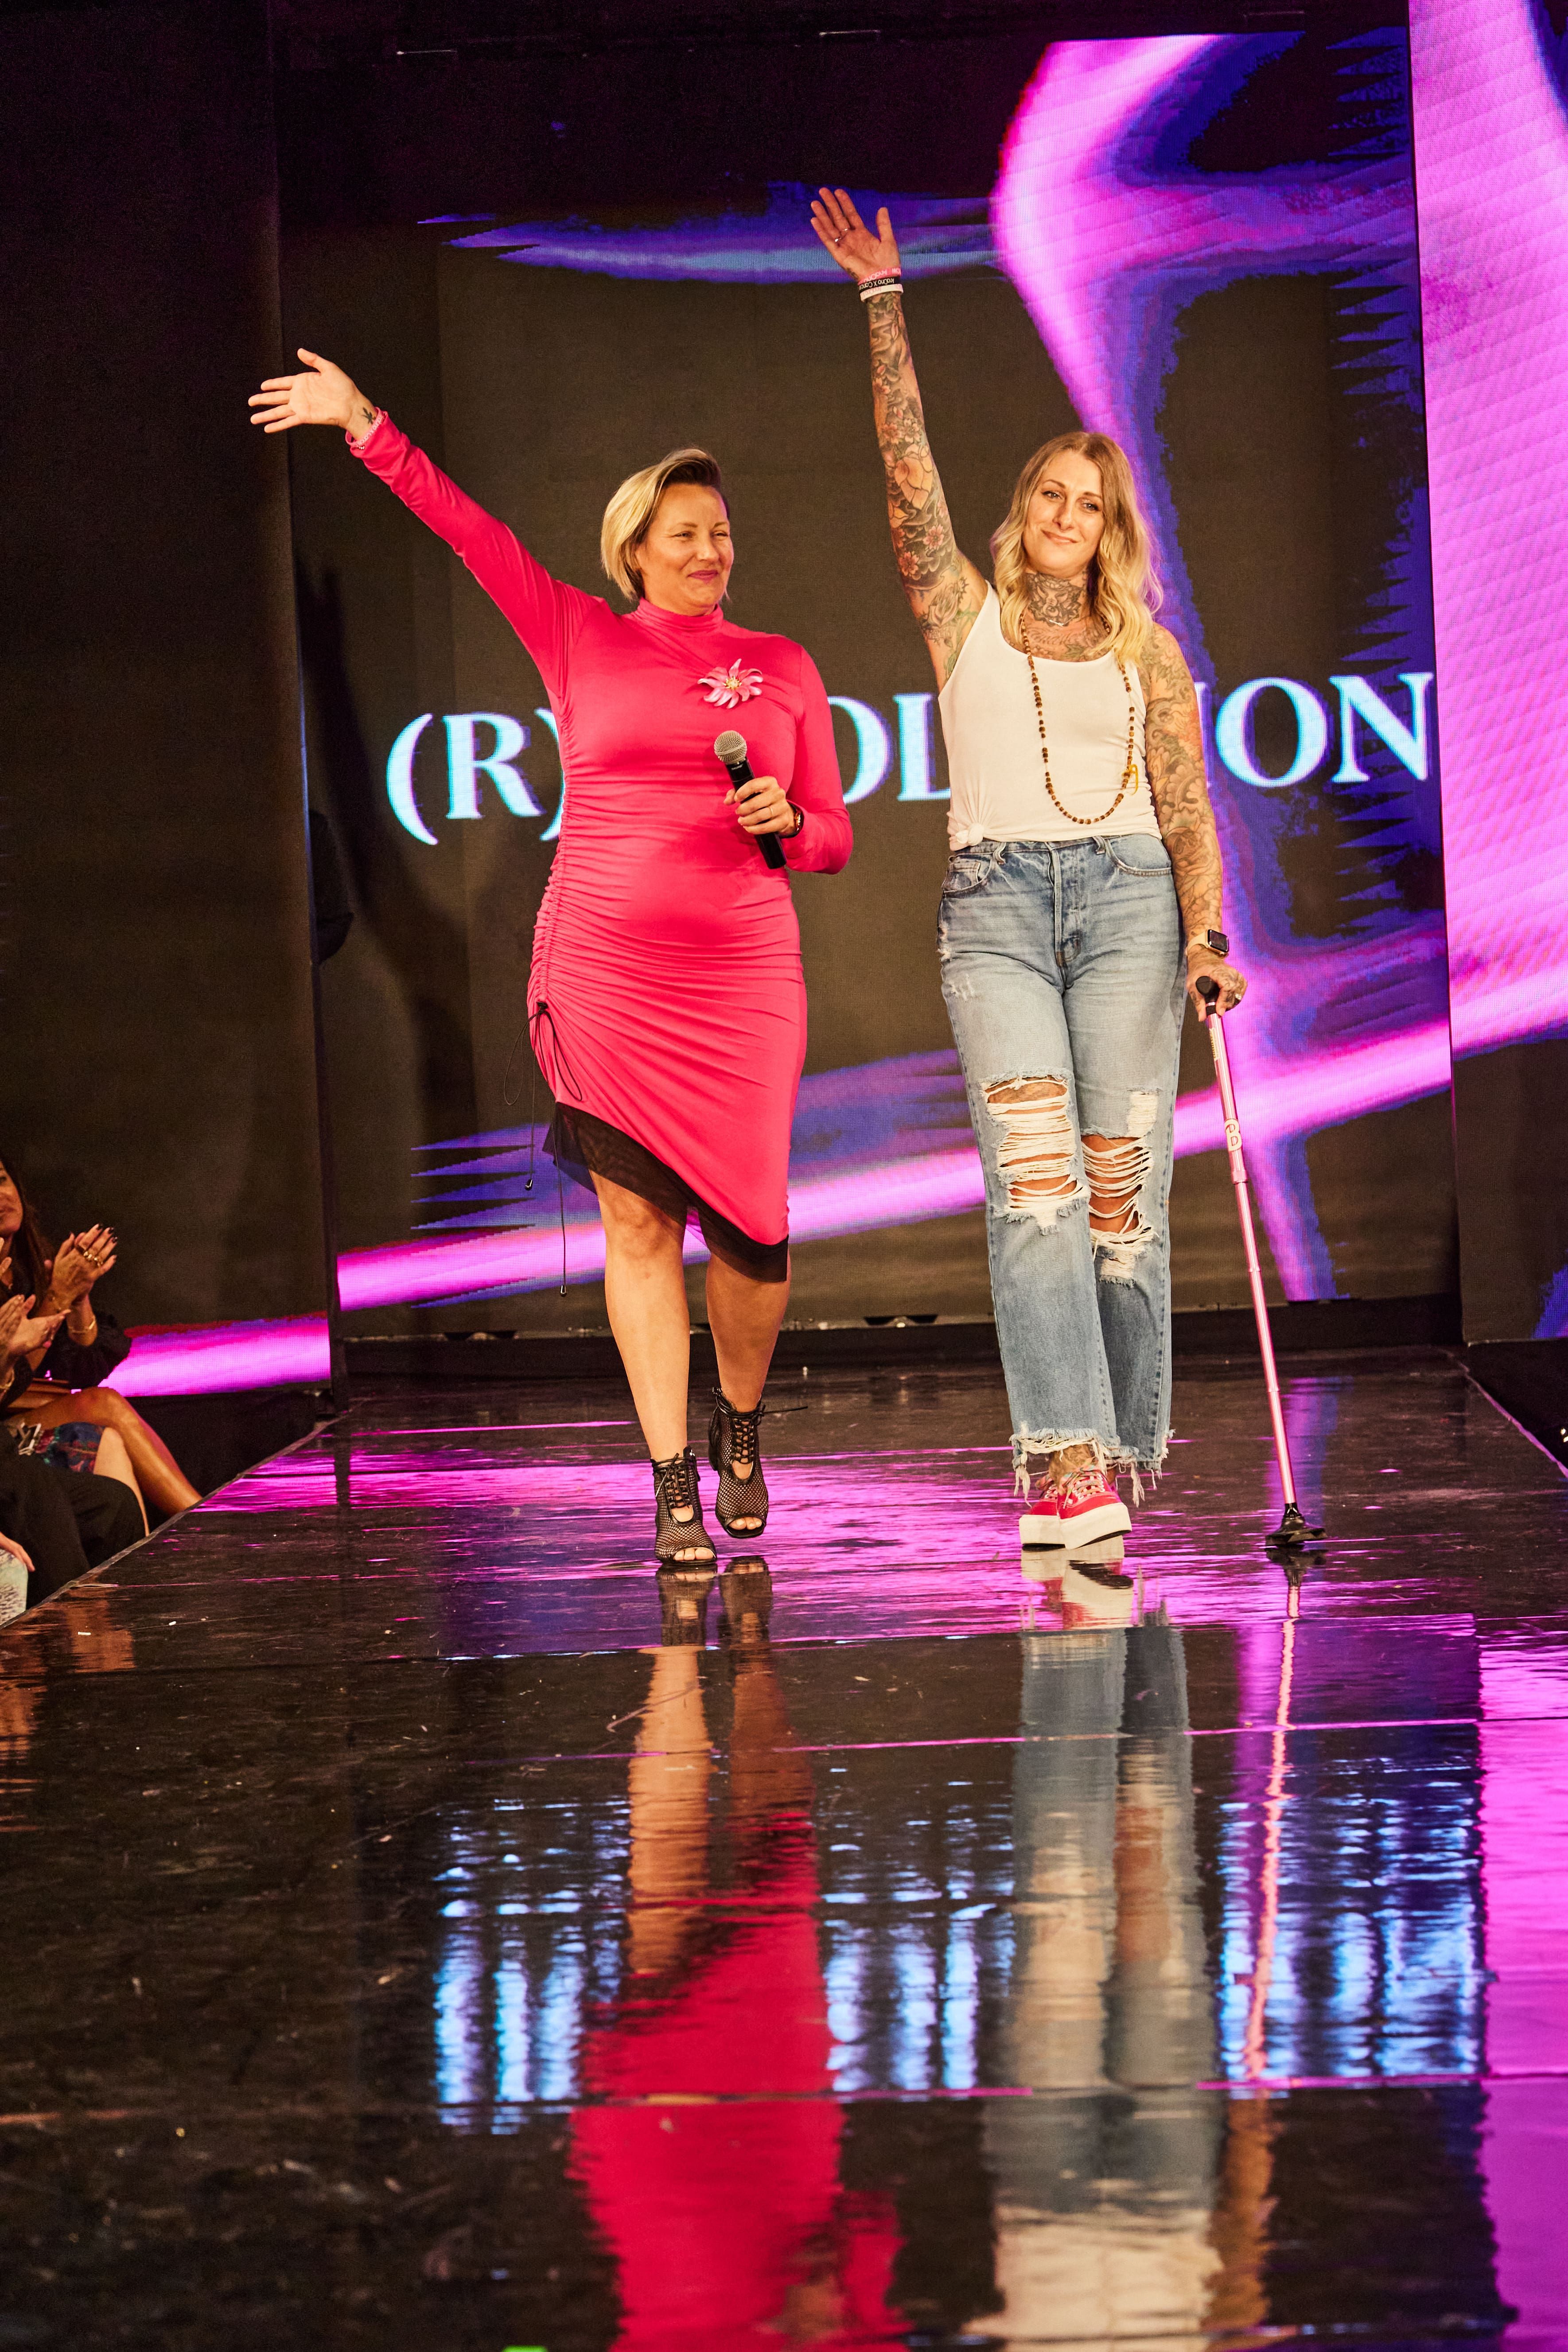 Women Dealing with Breast Cancer Walk at NYFW